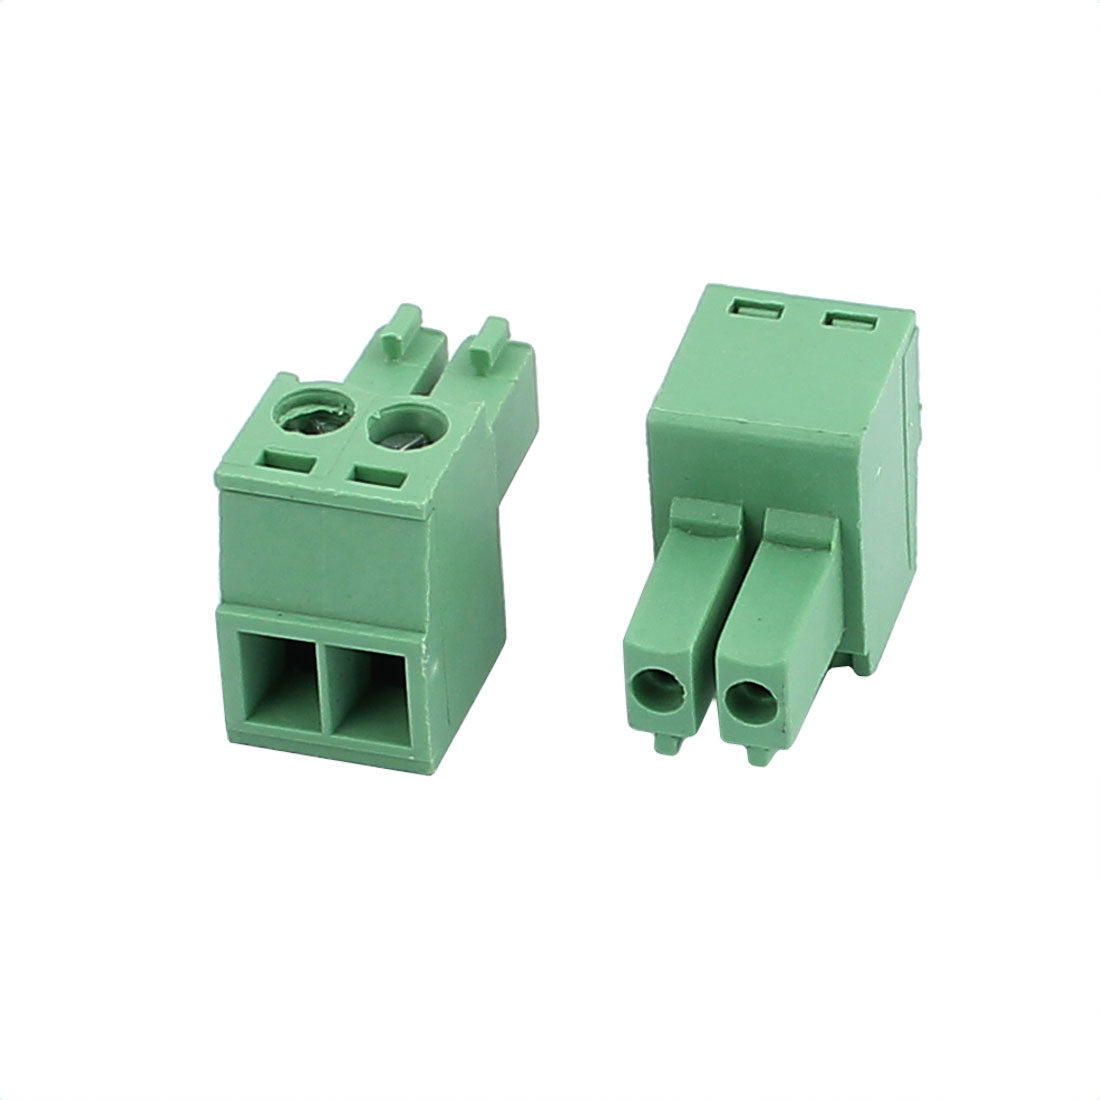 uxcell Uxcell 50Pcs 300V KF2EDGK 3.5mm Pitch 2-Pin PCB Screw Terminal Block Connector